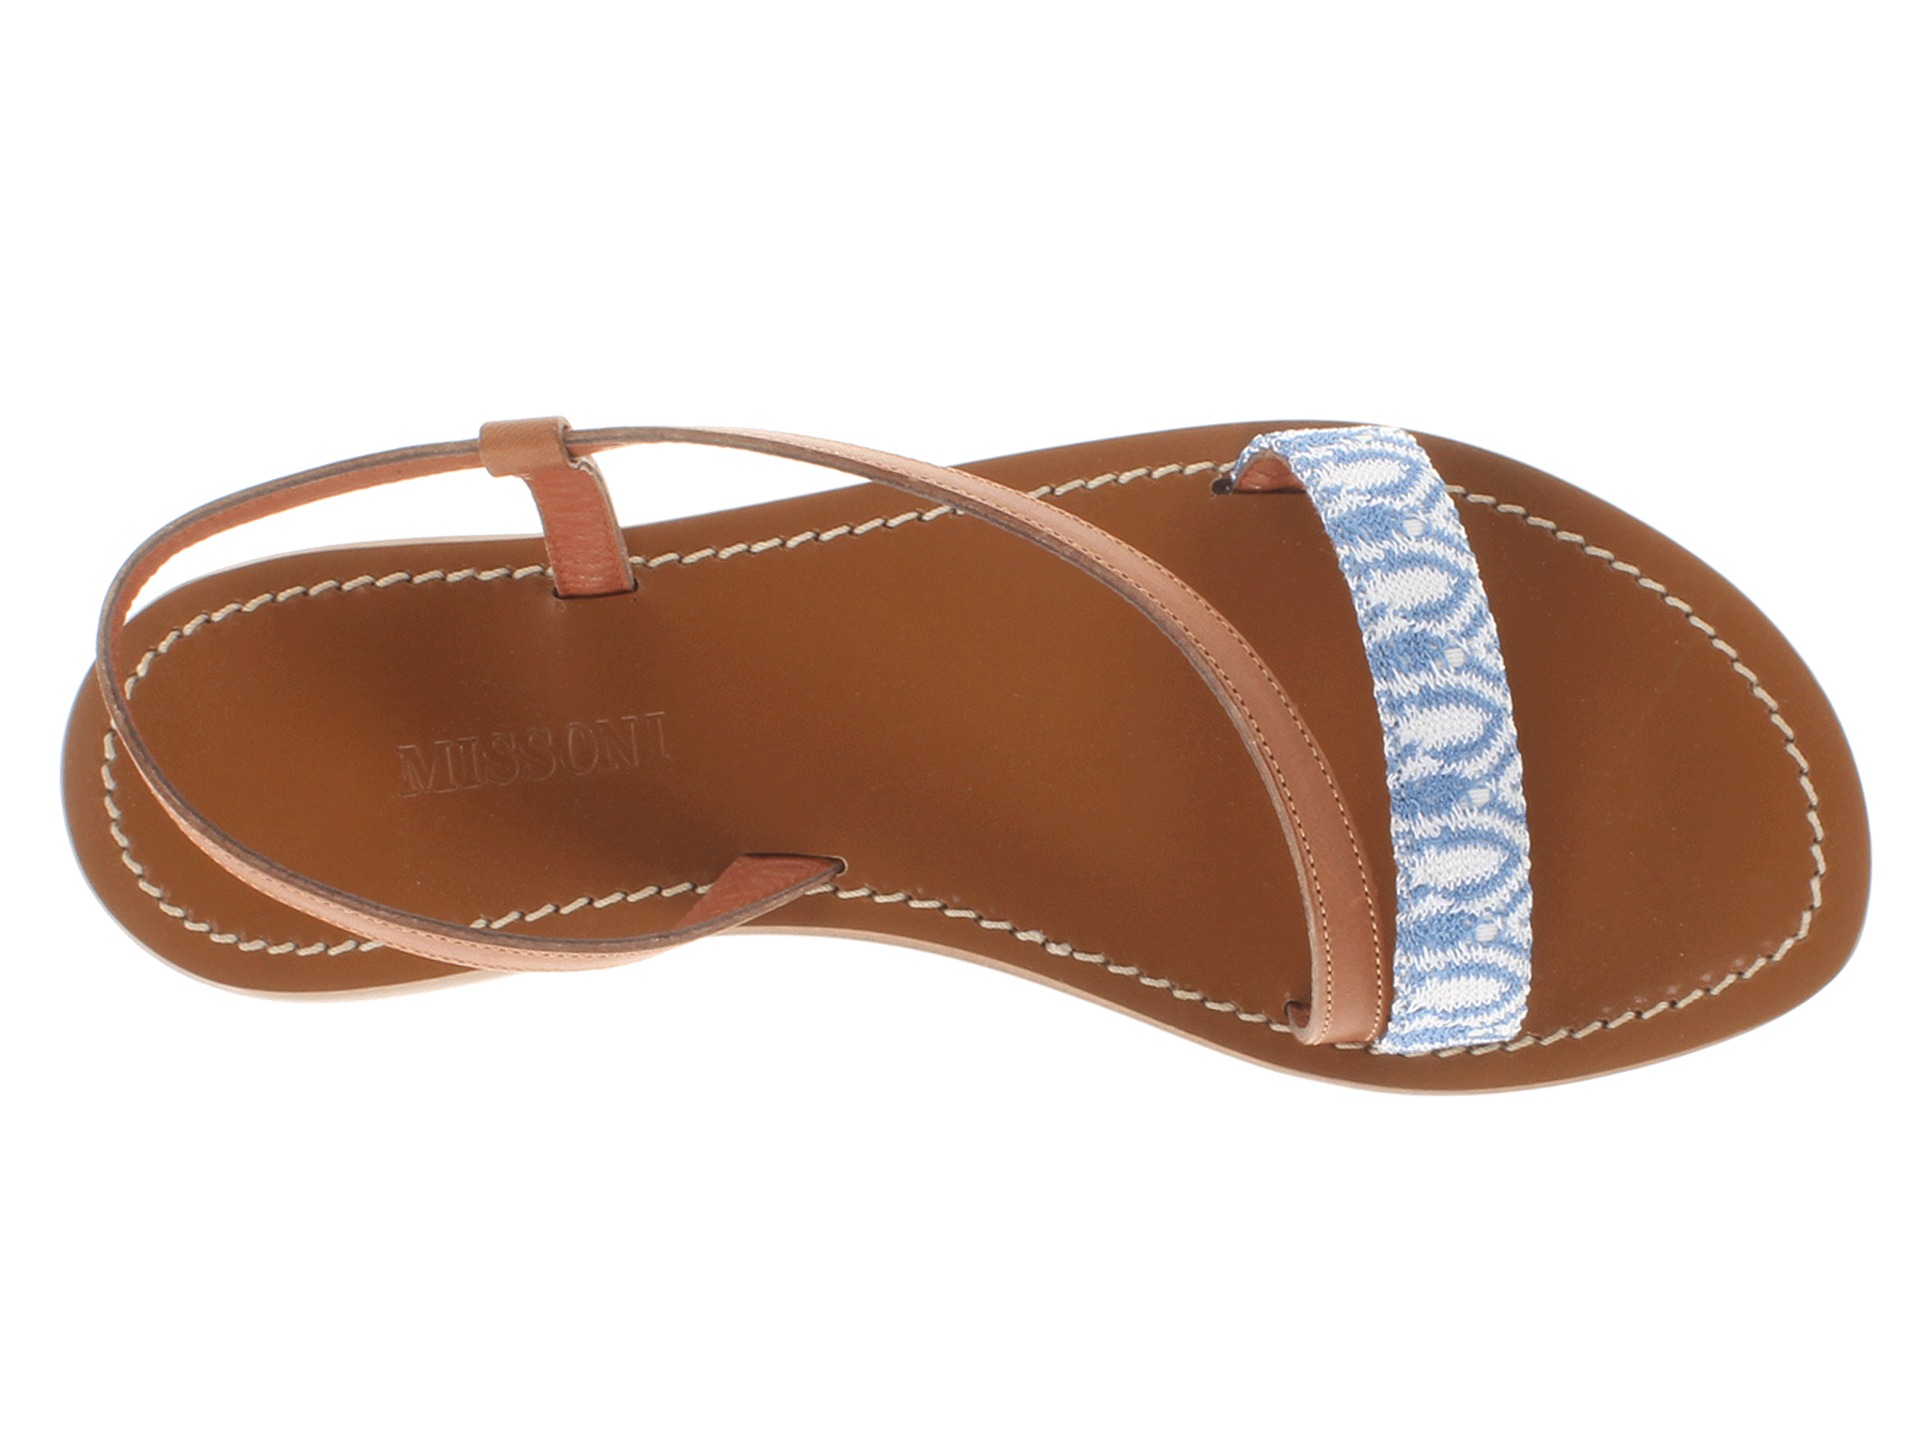 Missoni Crochet And Leather Sandal Blue Multi | Shipped Free at Zappos